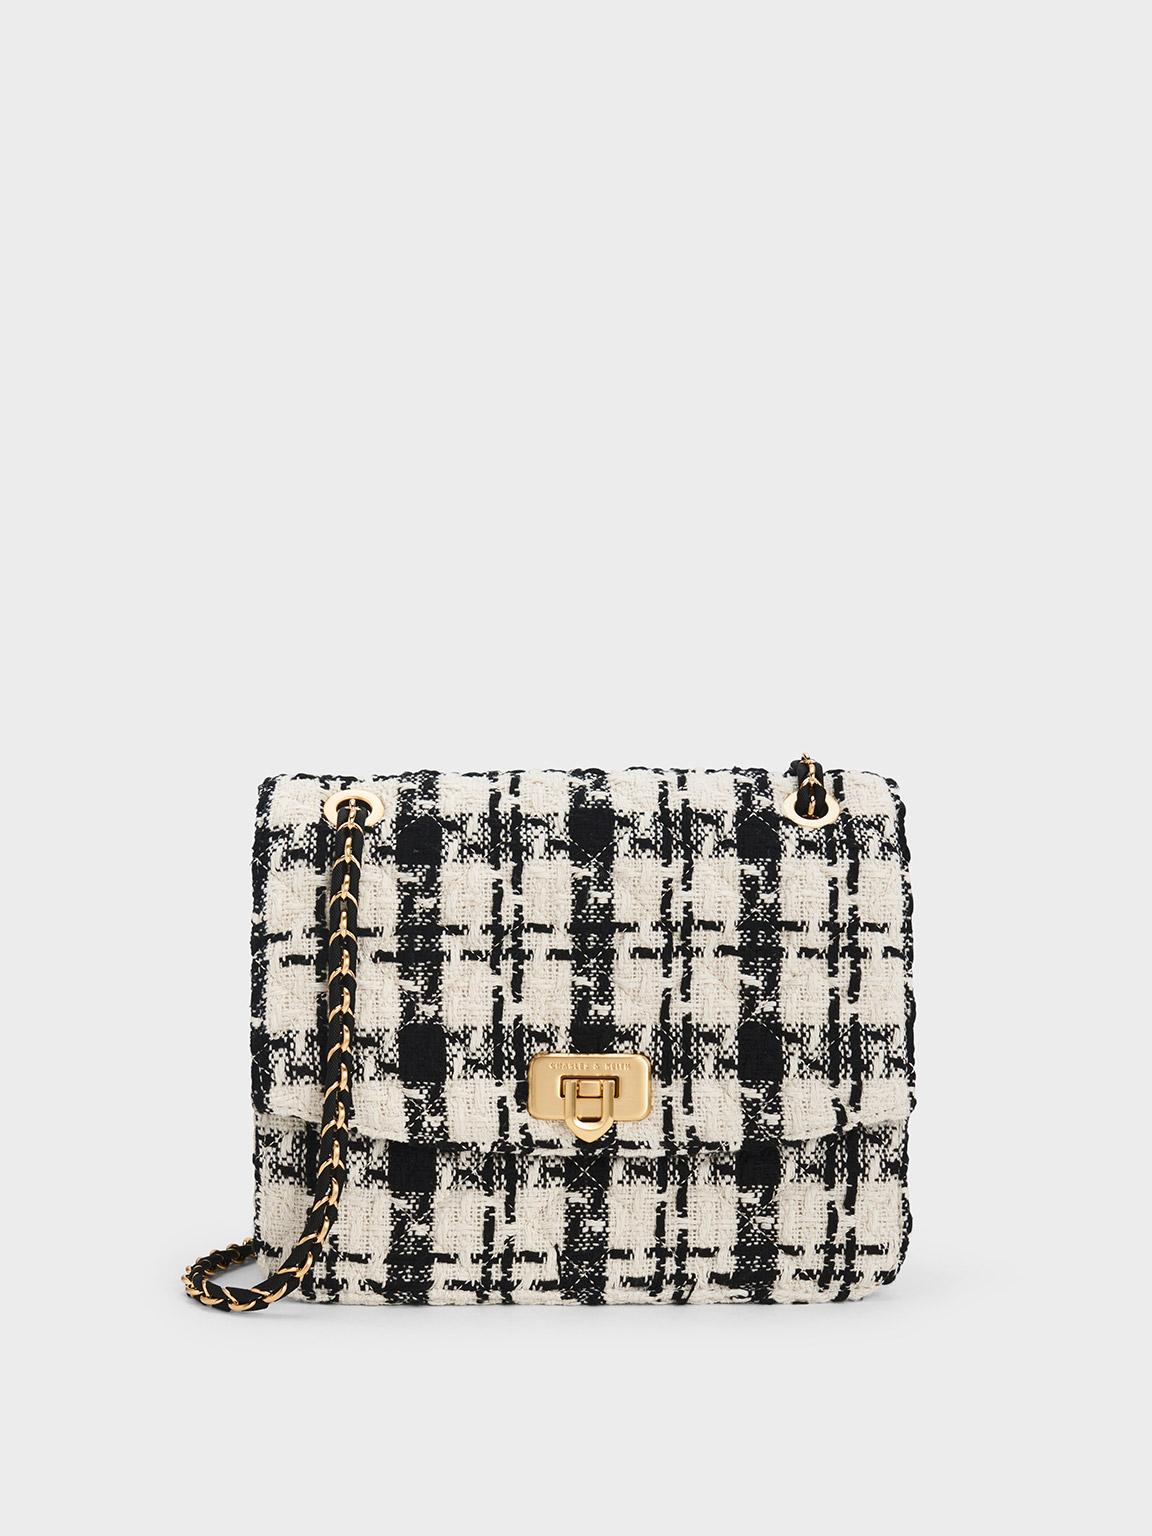 Charles & Keith Women's Micaela Tweed Quilted Chain Bag